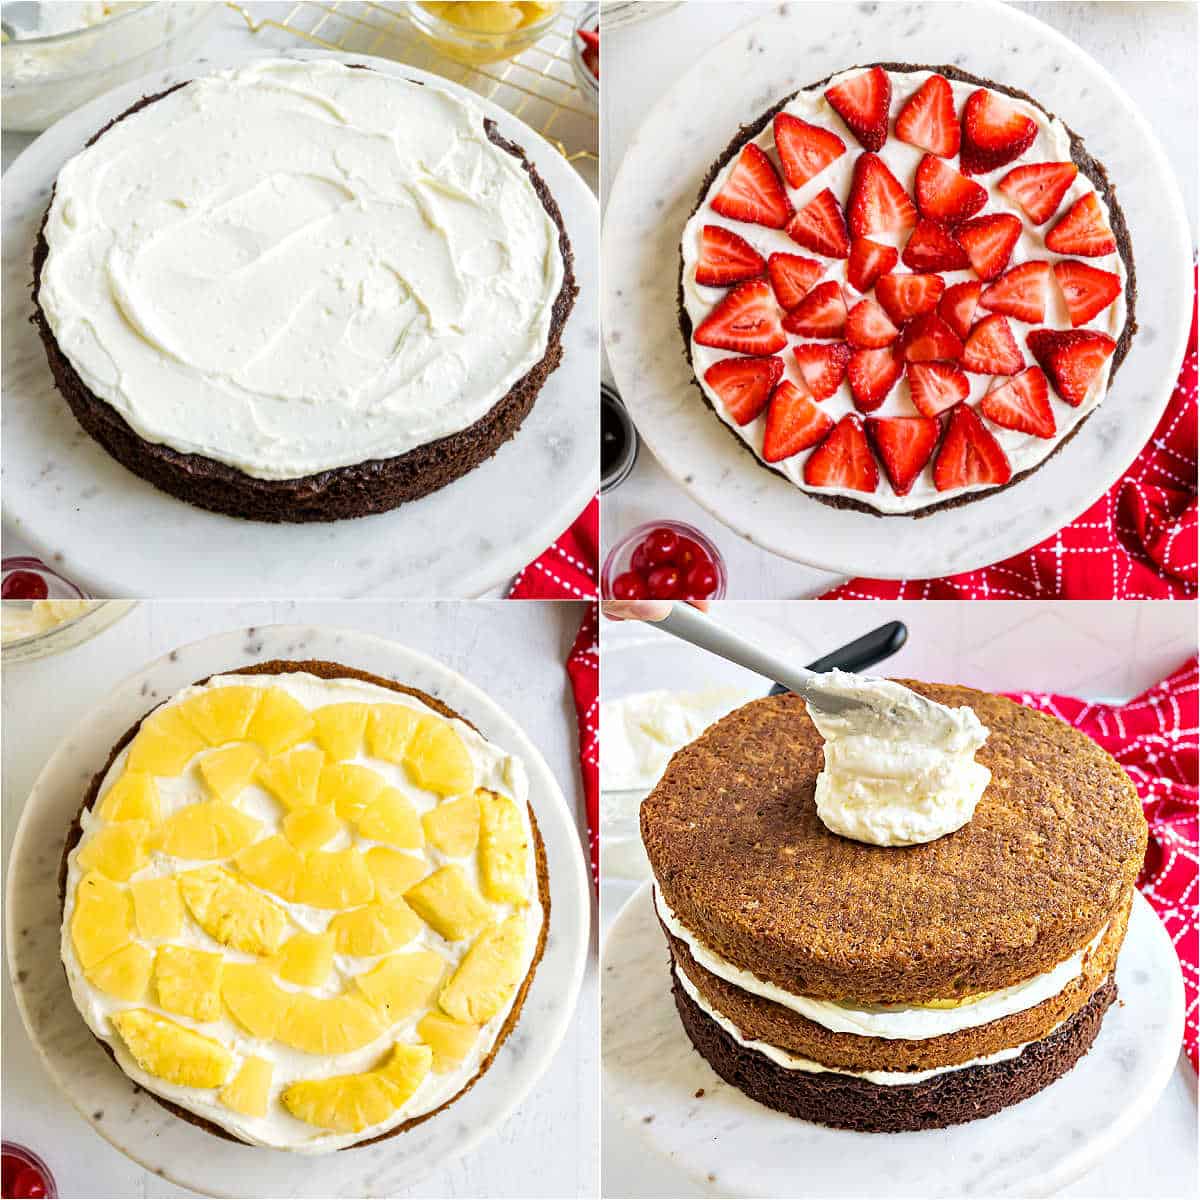 Step by step photos showing how to assemble banana split layer cake.